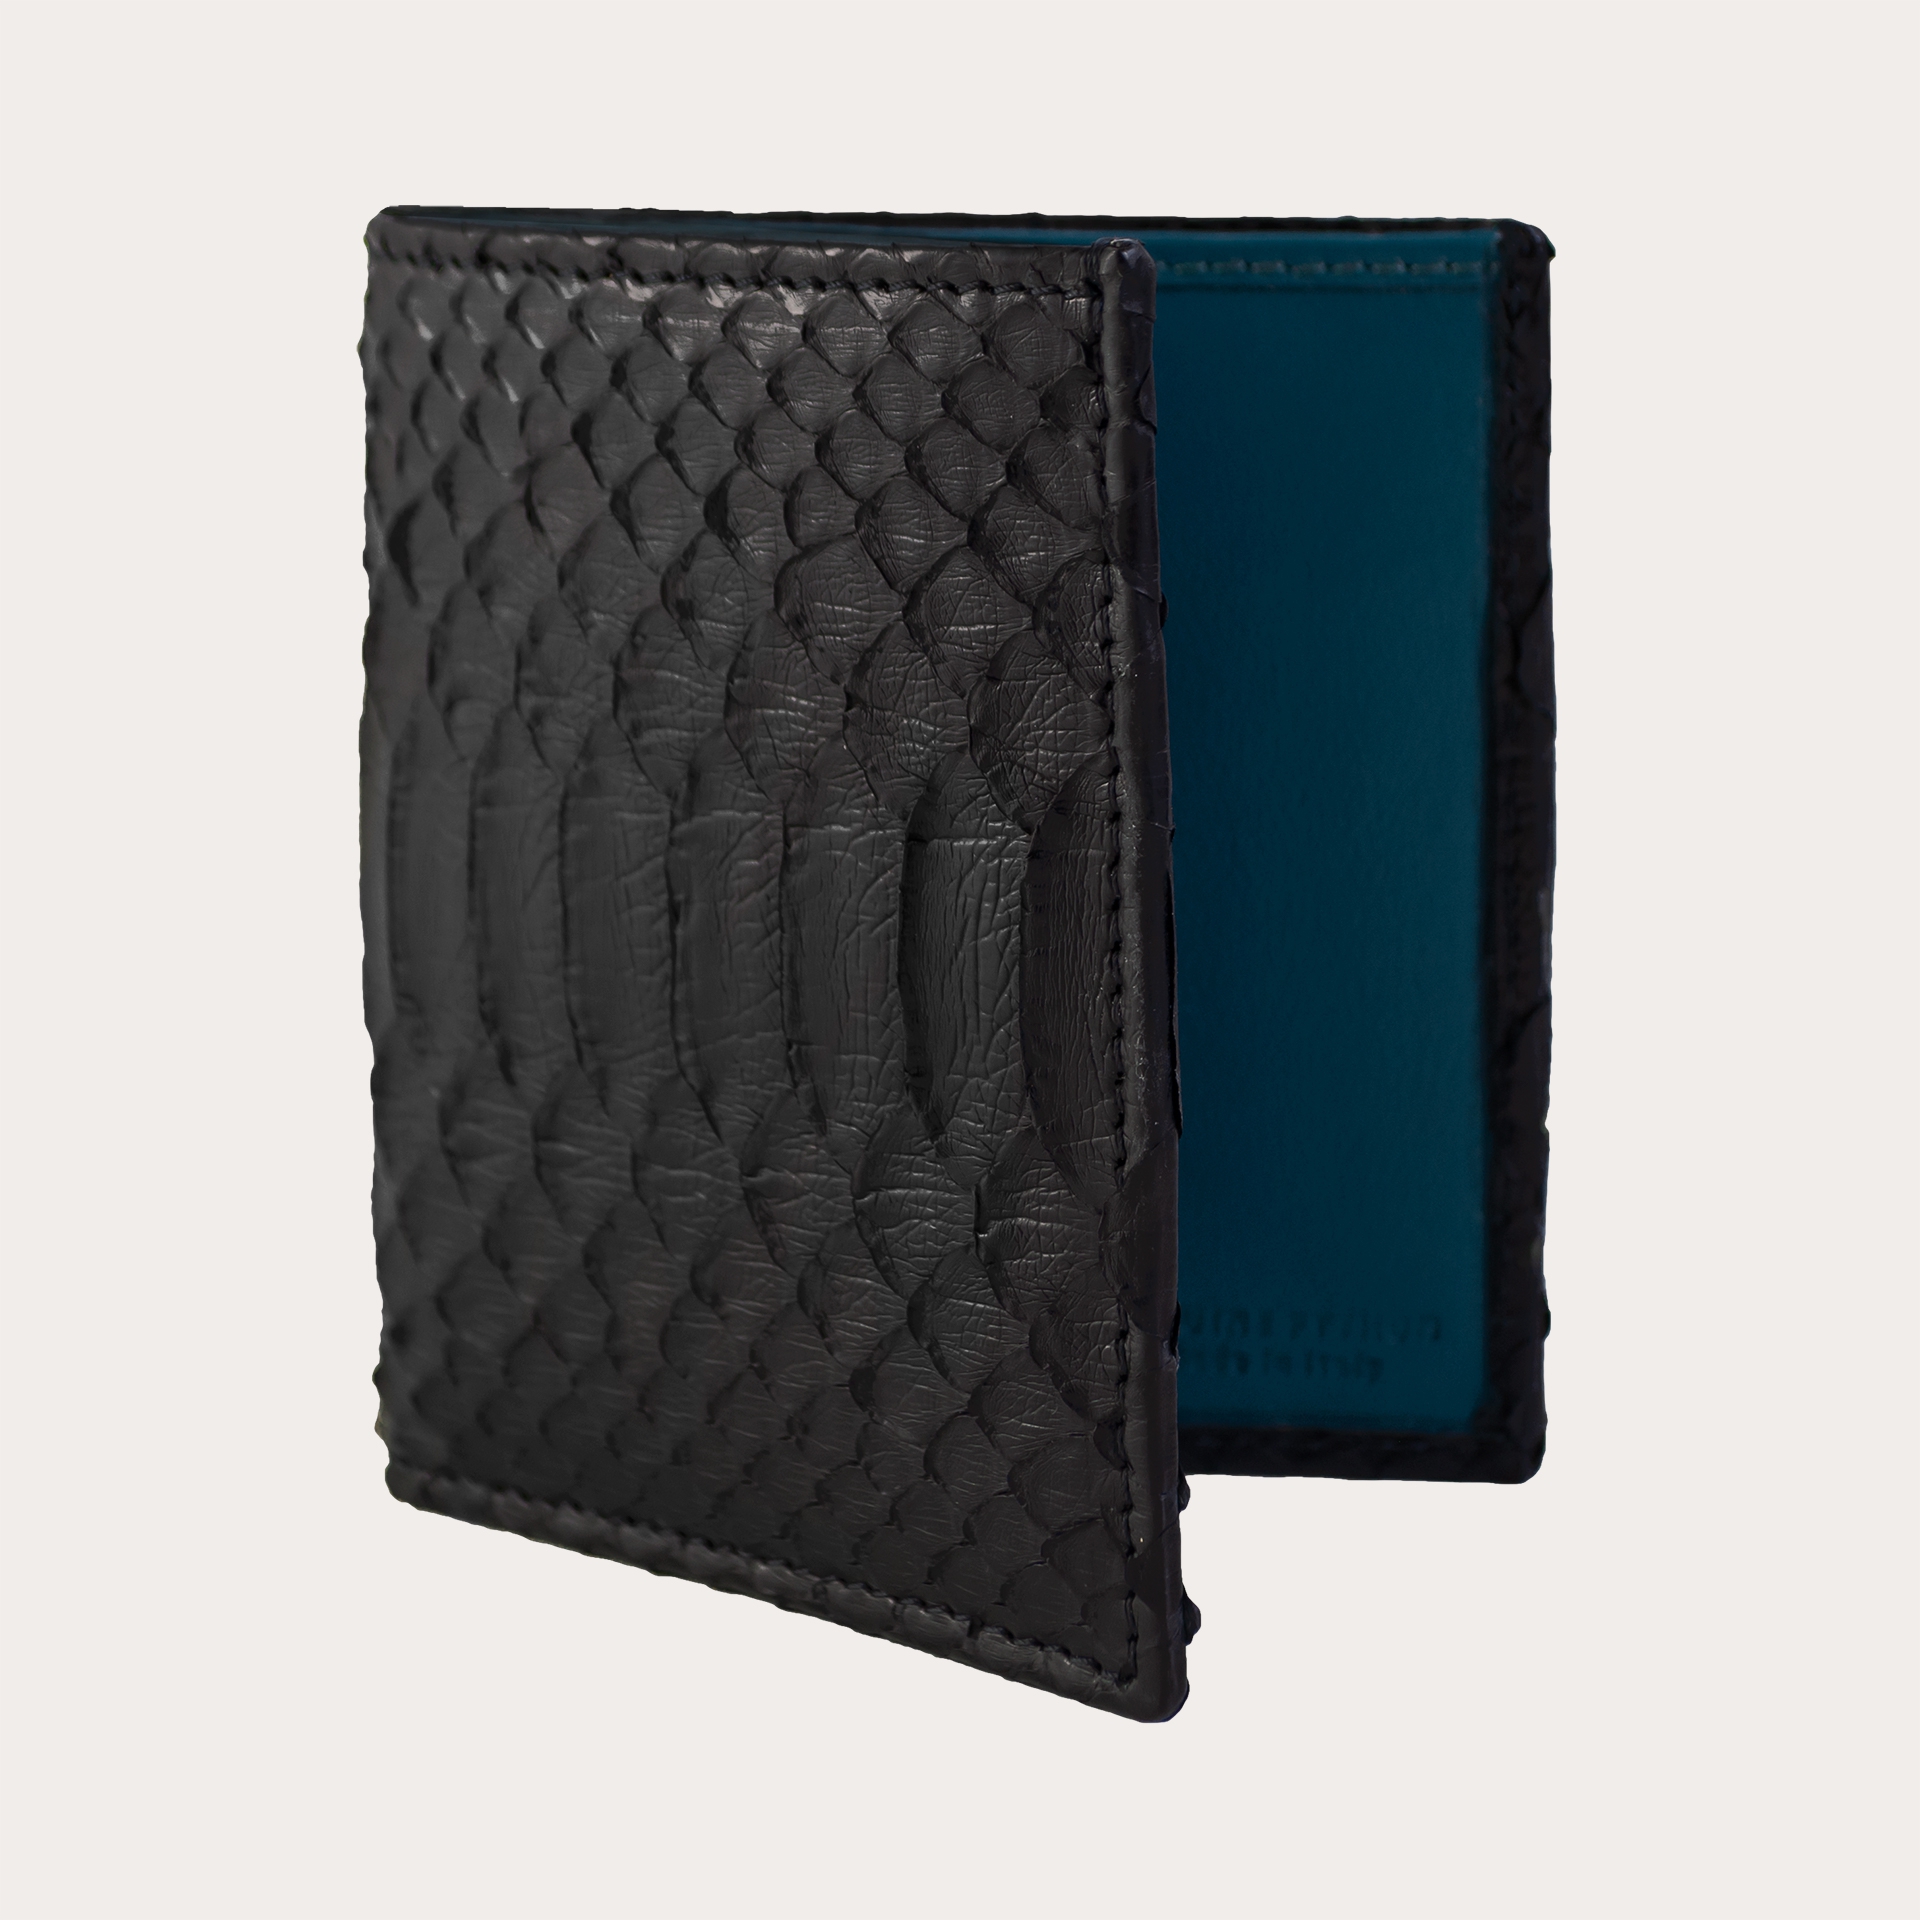 Bifold compact python leather wallet, black